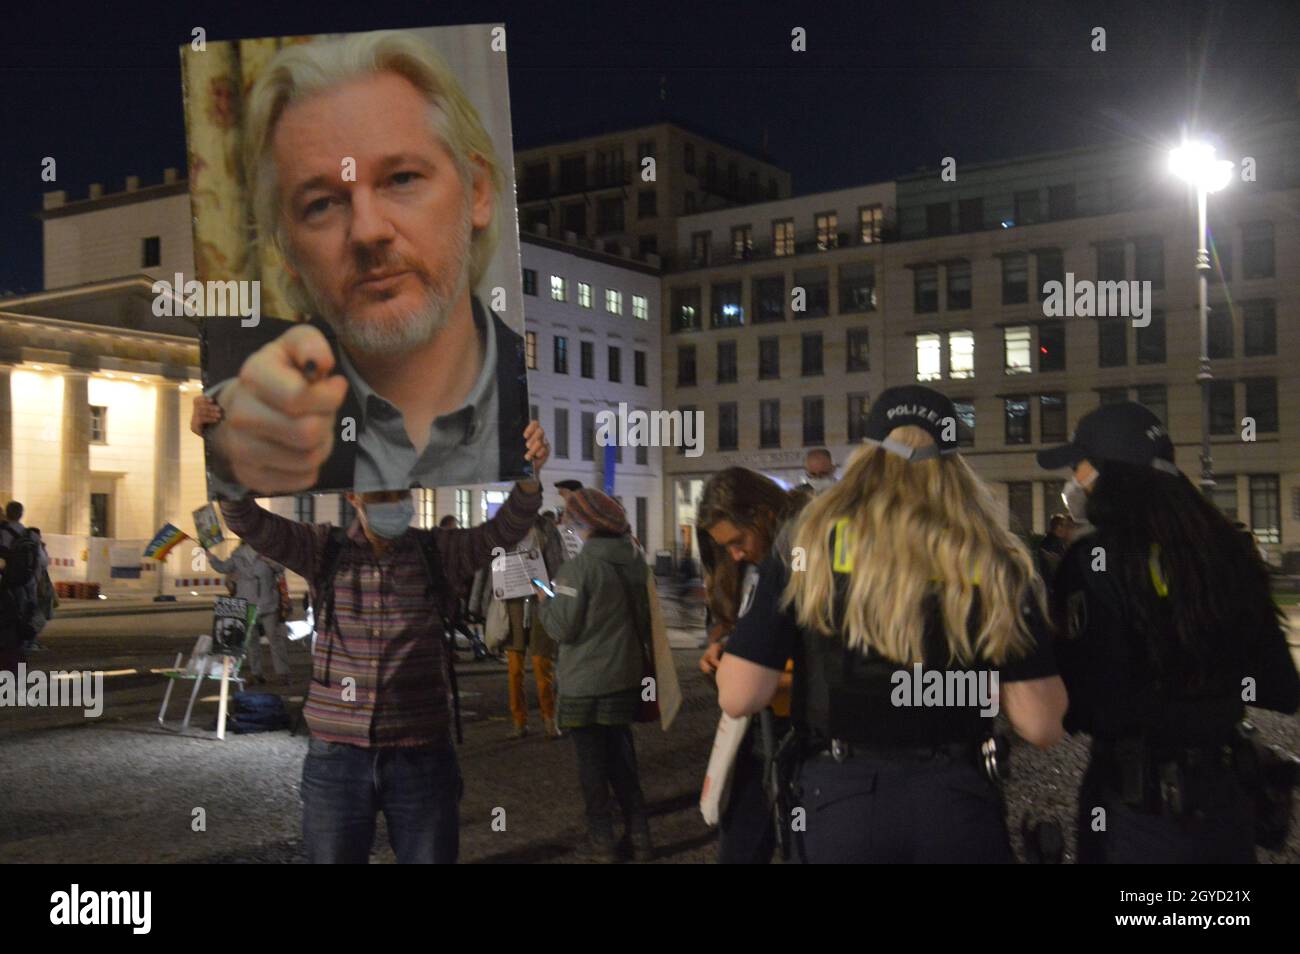 'Free Julian Assange - No U.S. Extradition' rally at Pariser Platz square in front of The Brandenburg Gate and U.S. Embassy in Berlin, Germany - October 7, 2021. Stock Photo